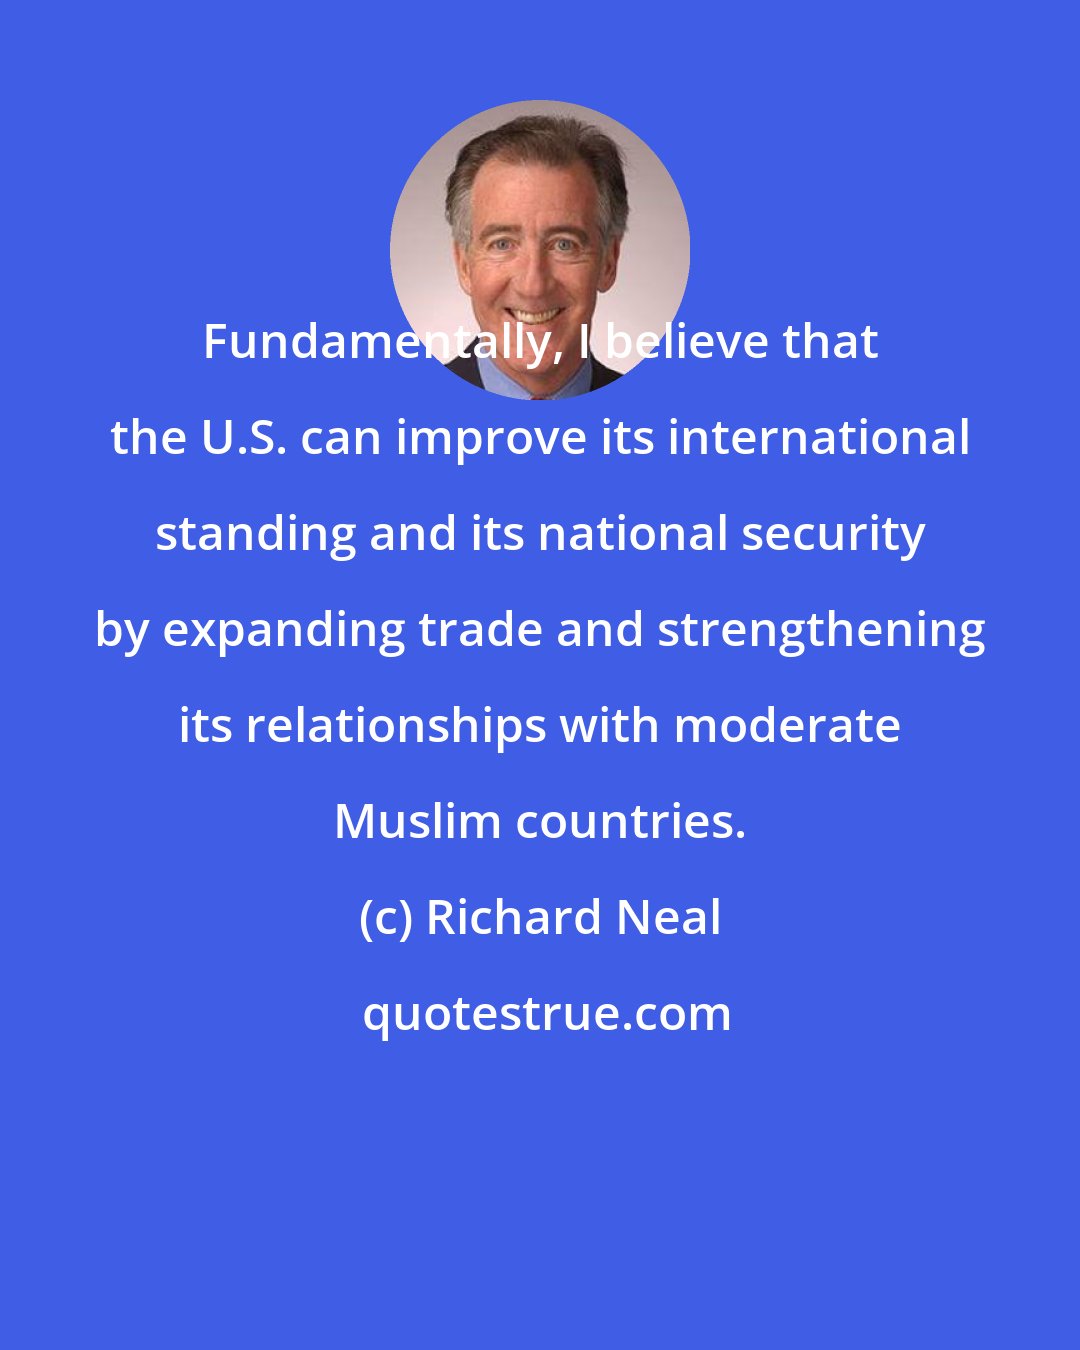 Richard Neal: Fundamentally, I believe that the U.S. can improve its international standing and its national security by expanding trade and strengthening its relationships with moderate Muslim countries.